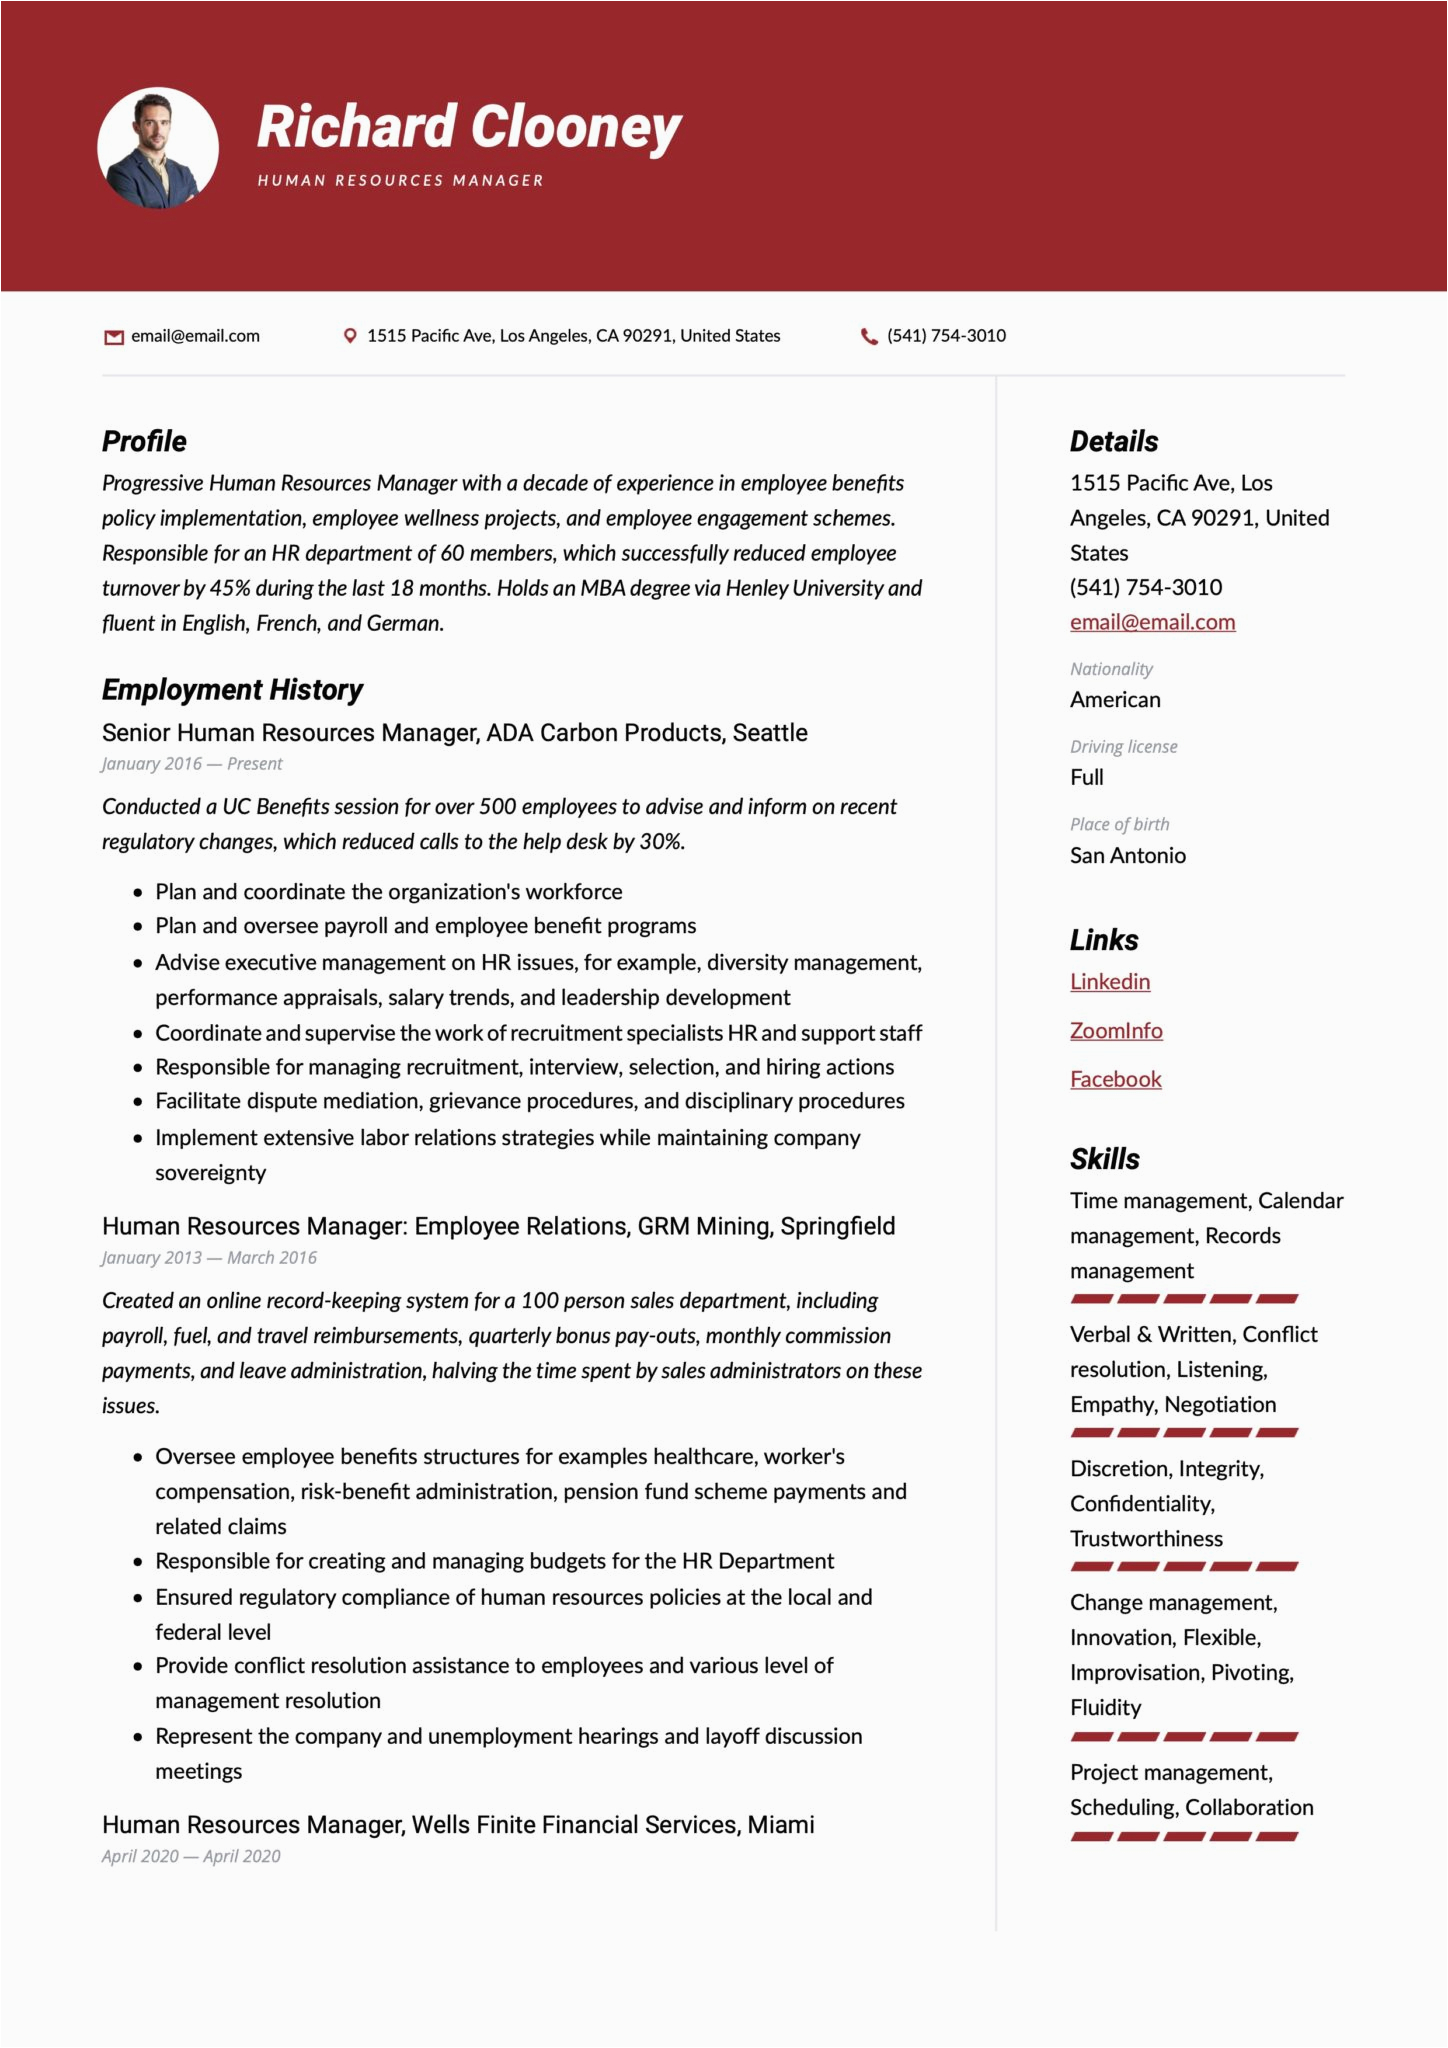 Resume Sample for Human Resource Position 17 Human Resources Manager Resumes & Guide